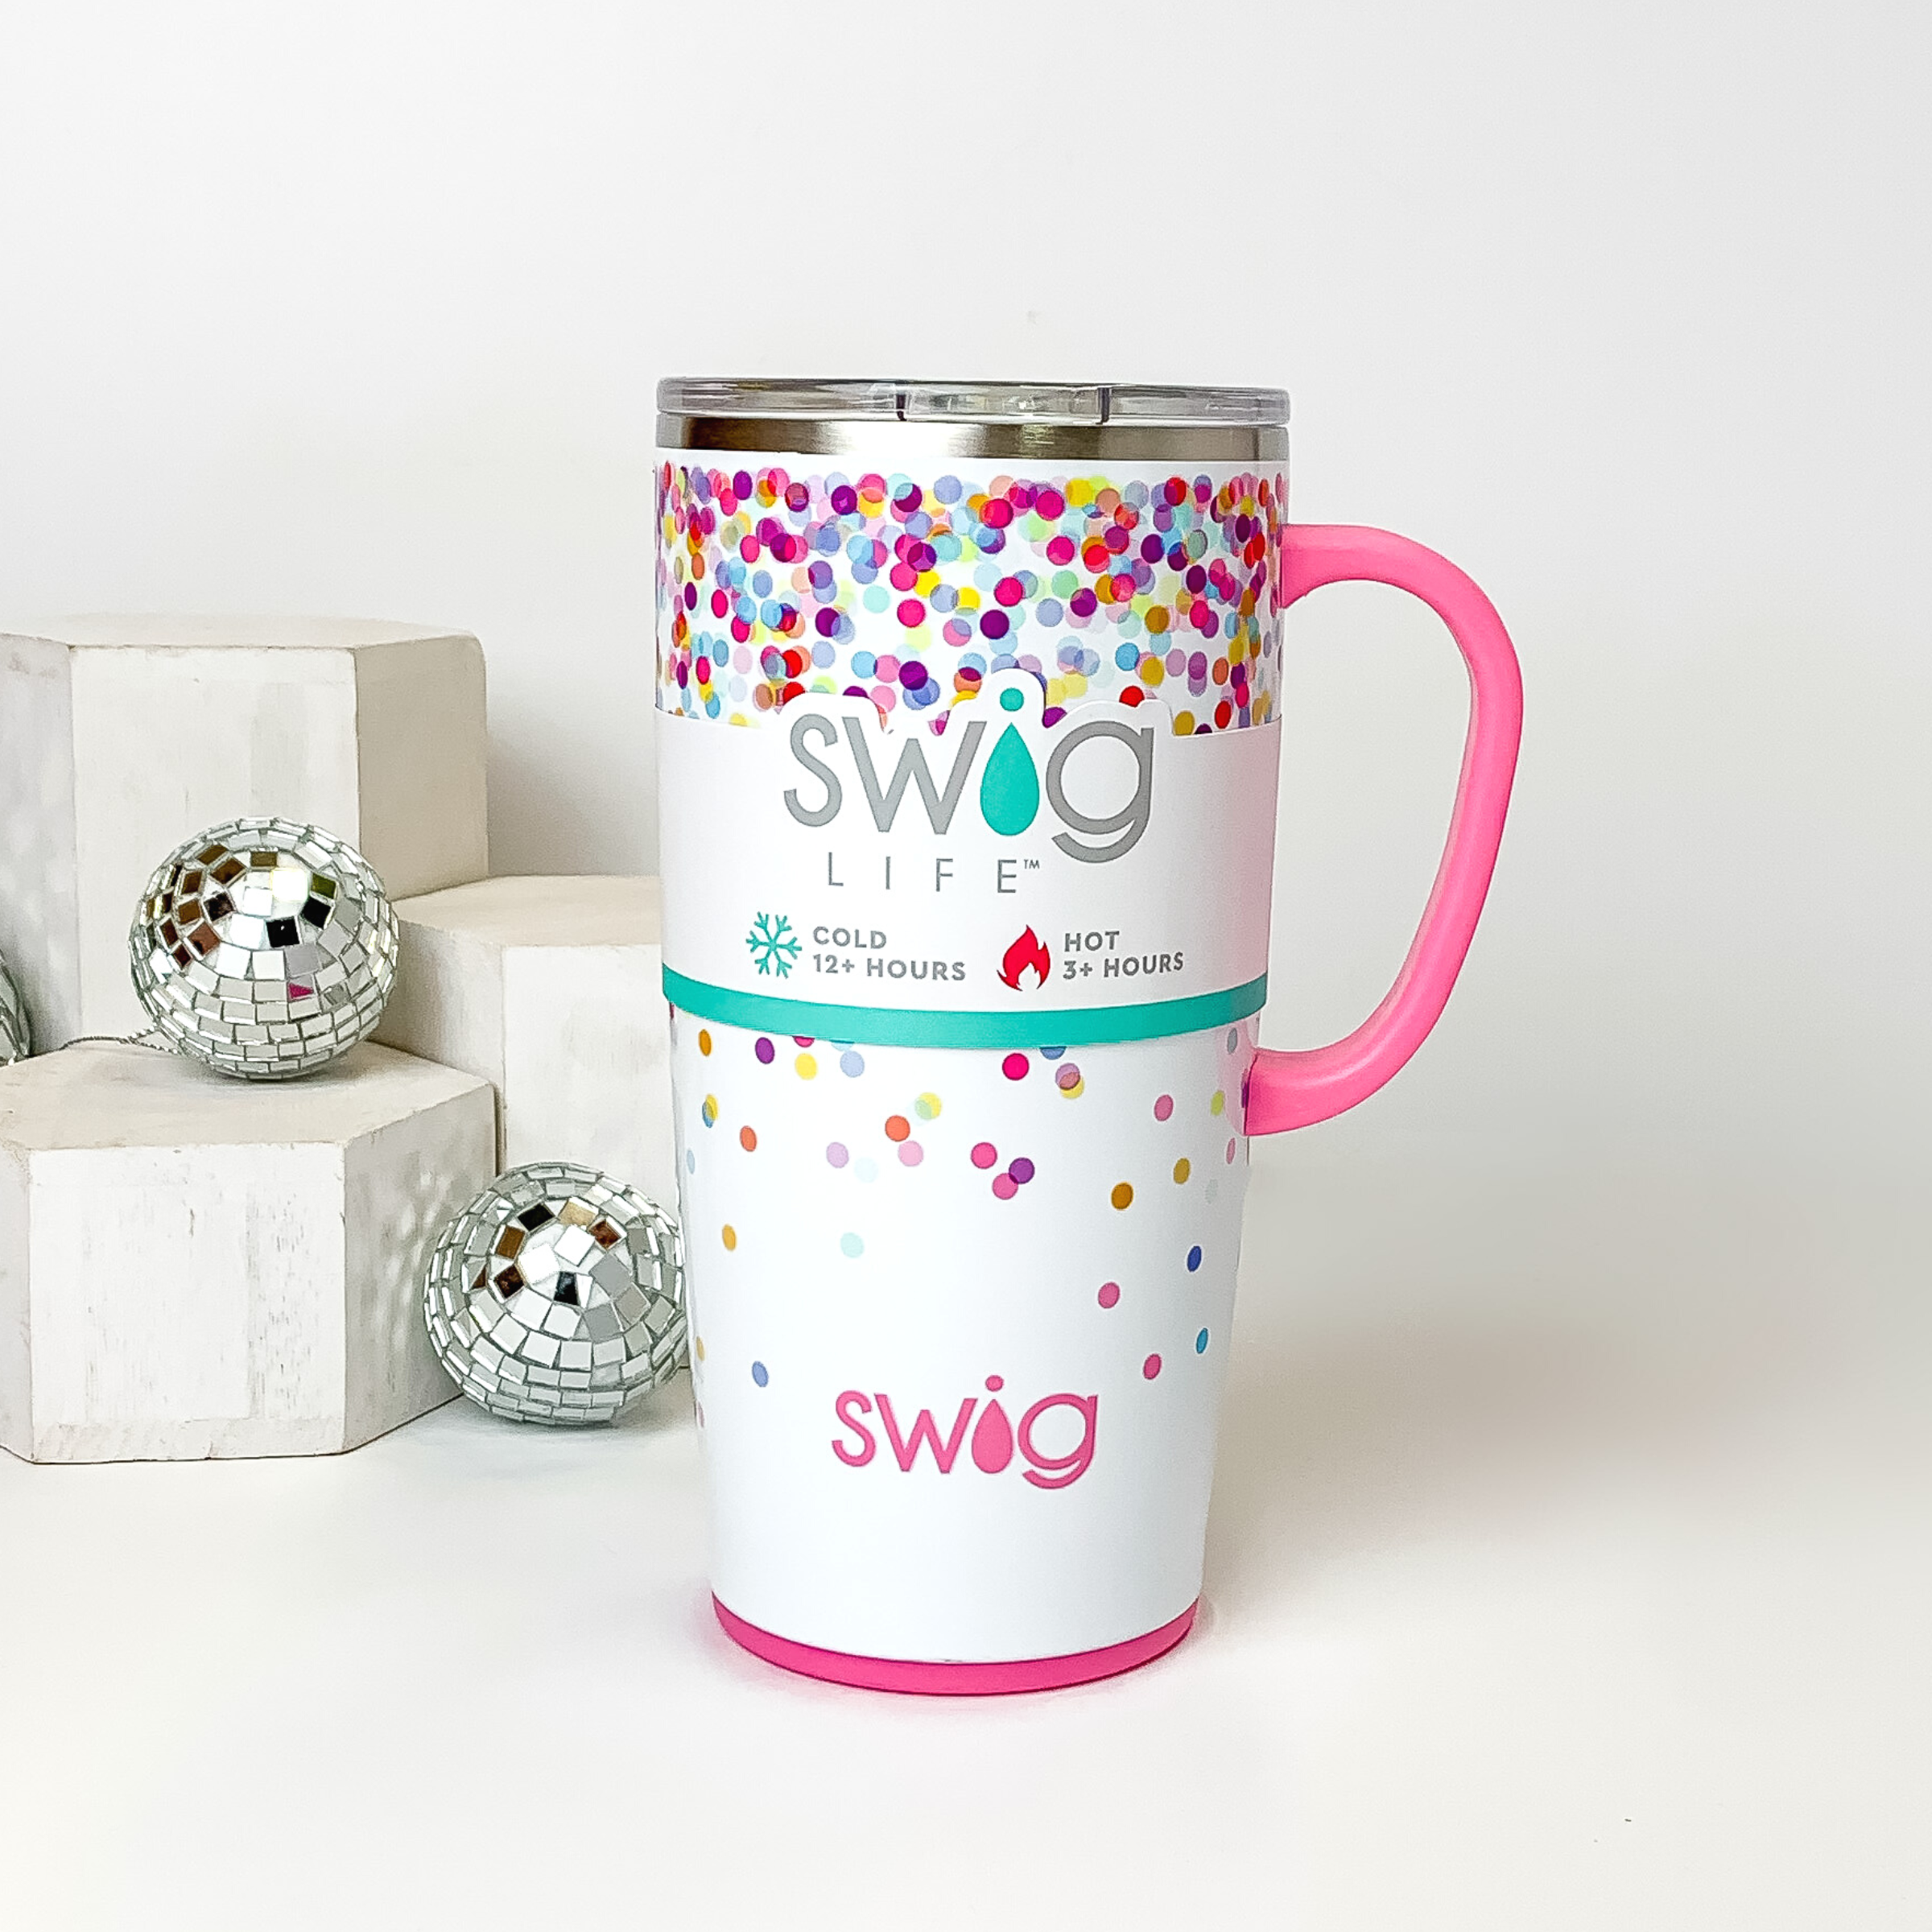 Shop Our Festive Finds 🎁🎀 - Swig